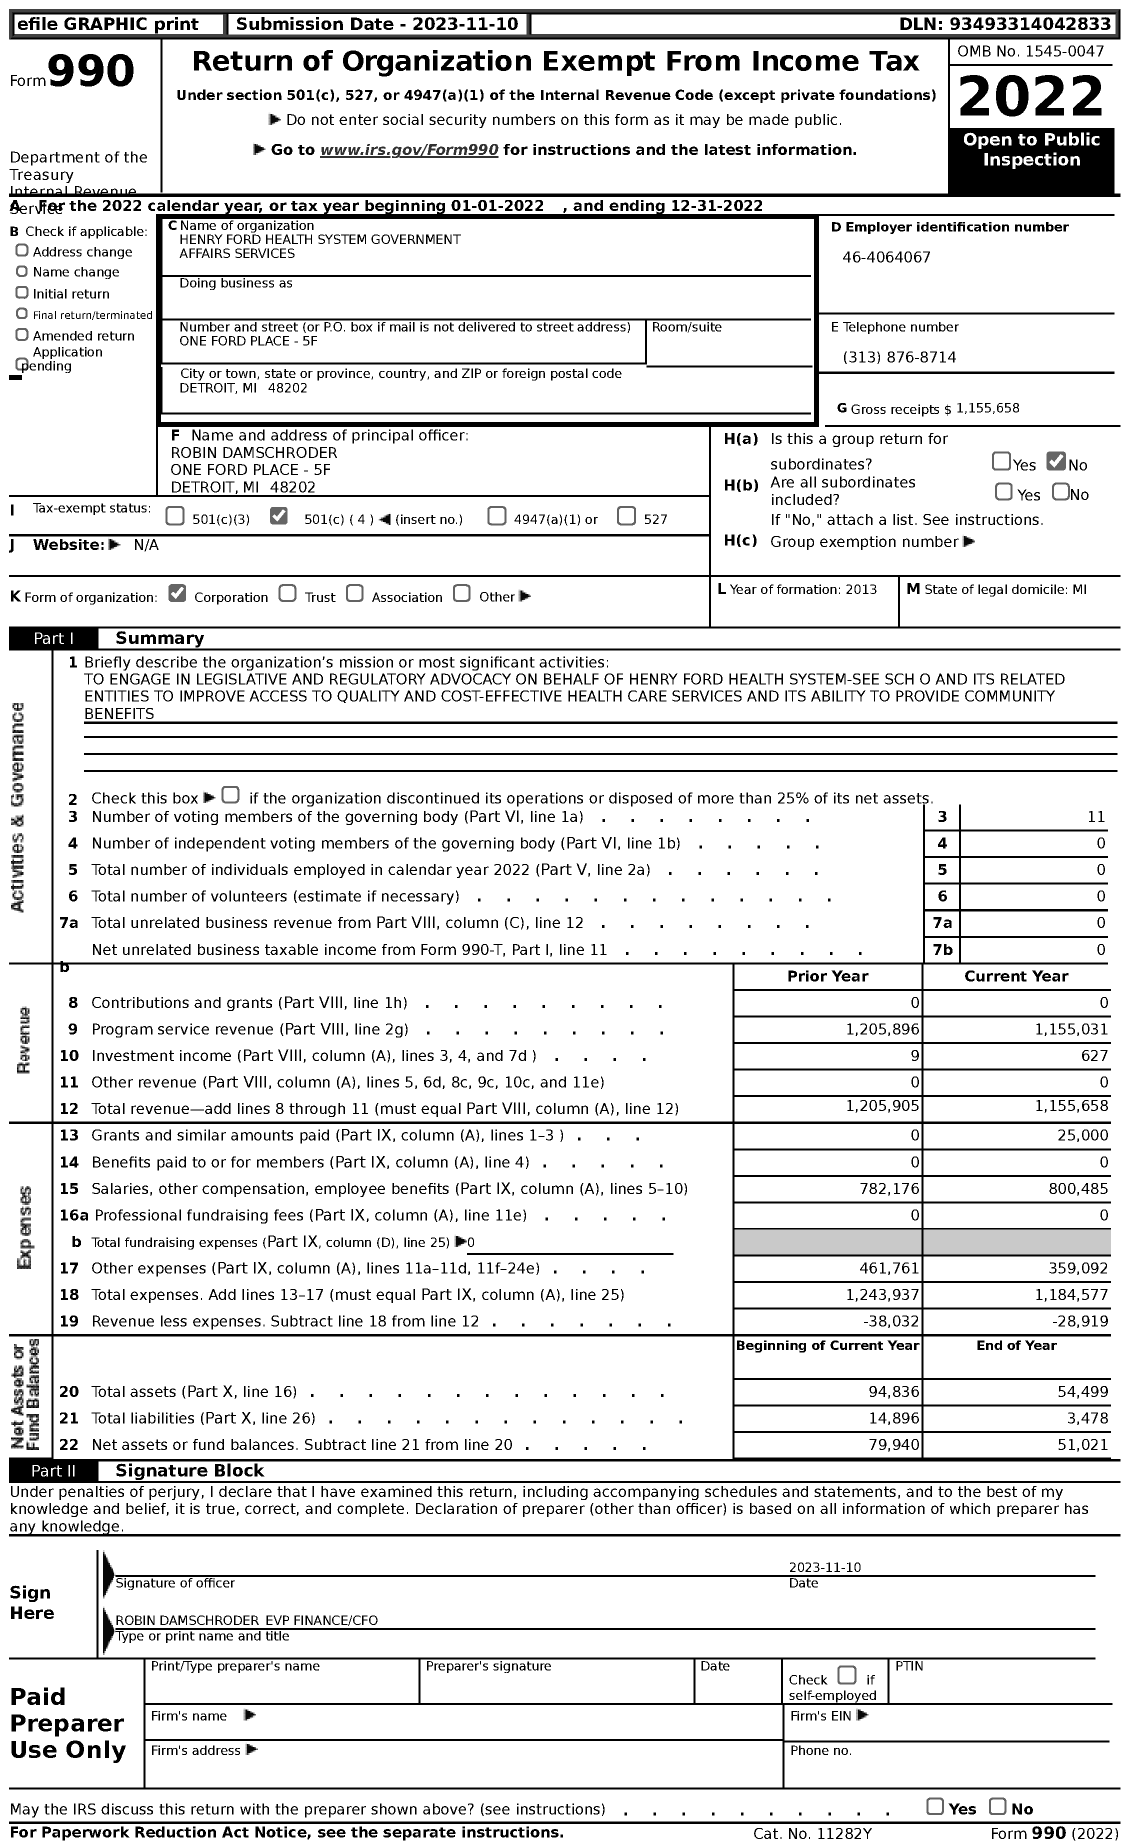 Image of first page of 2022 Form 990 for Henry Ford Health System Government Affairs Services